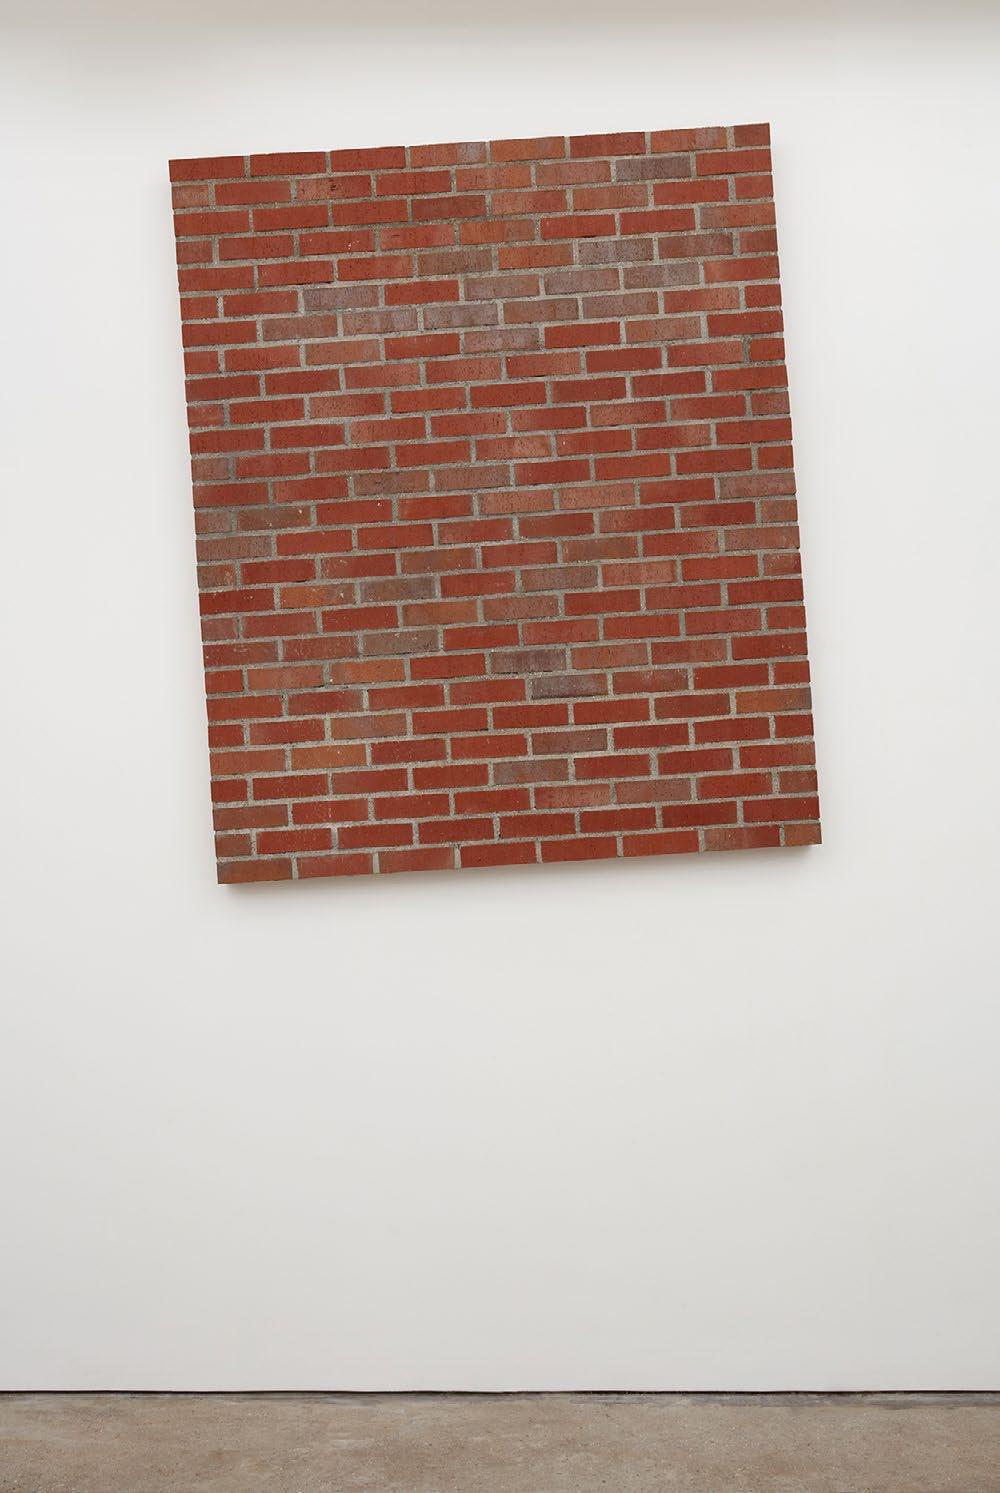 Motion With 2016 Untitled 2016 brickwork two parts, each 186 x 156 x 9 cm Motion